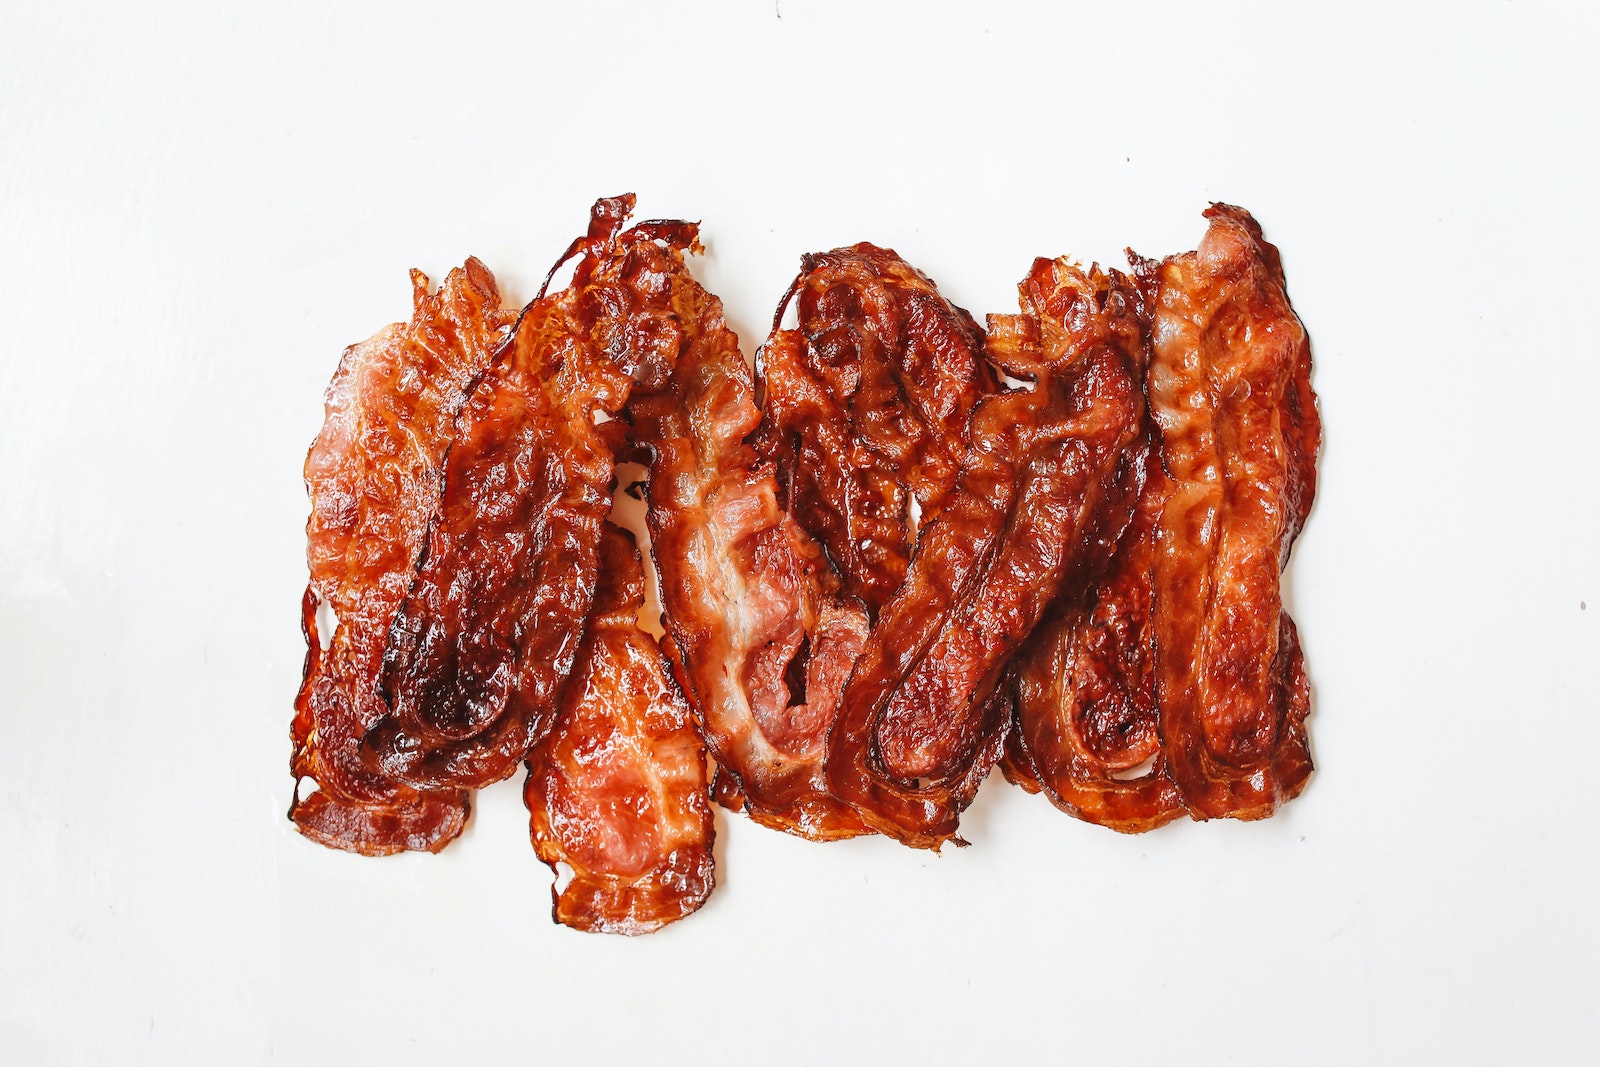 Fried Strips Of Meat On White Surface